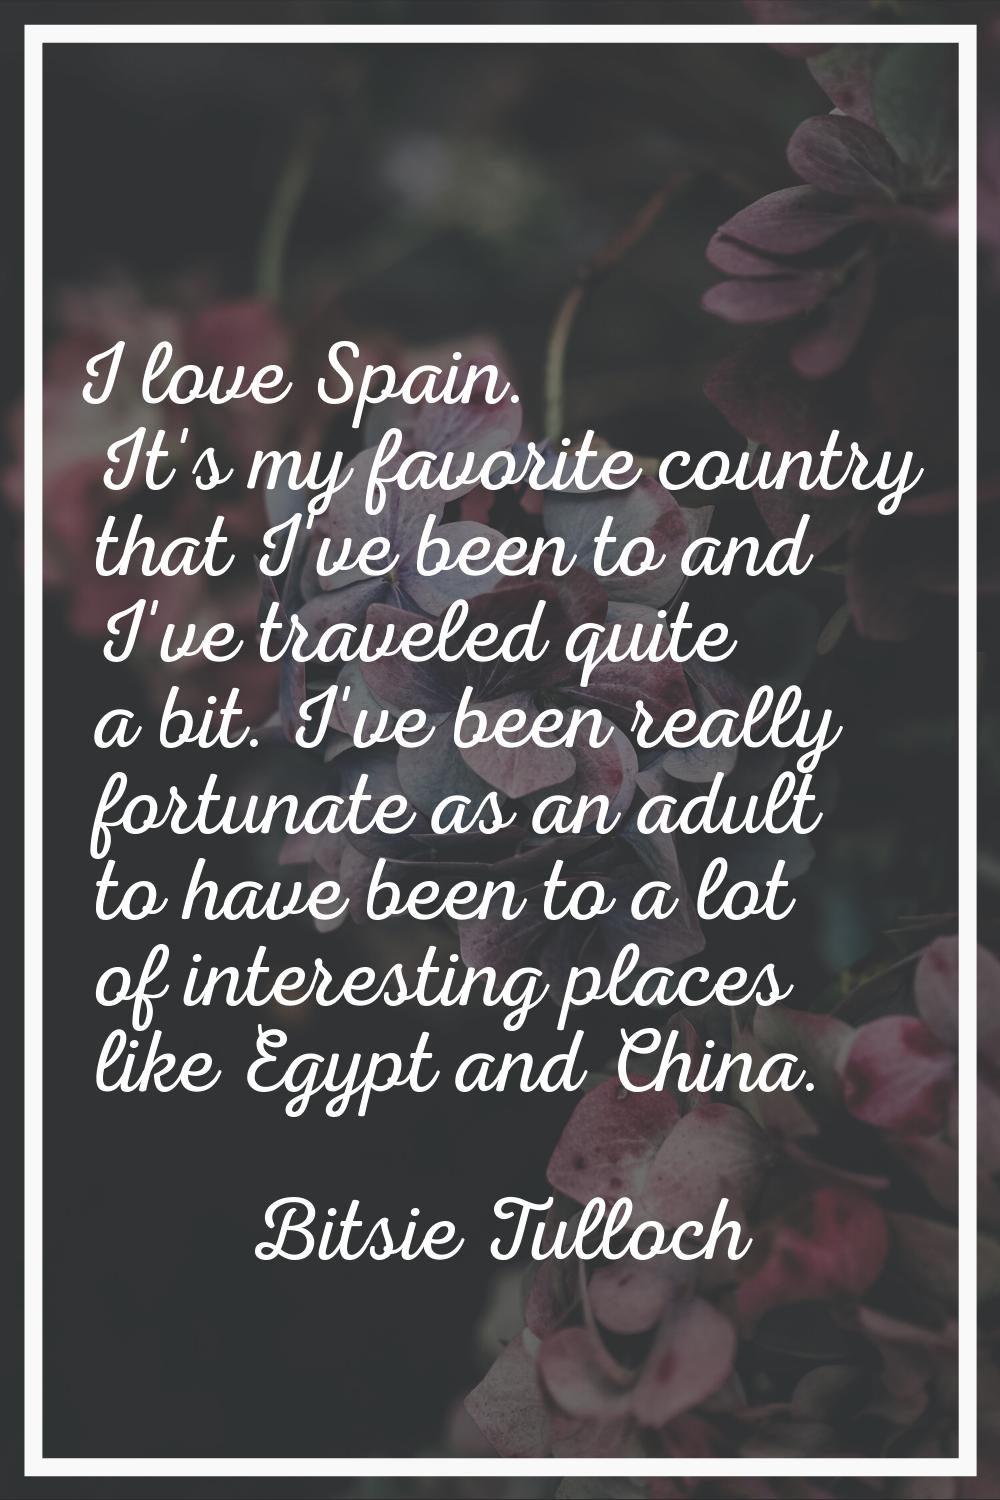 I love Spain. It's my favorite country that I've been to and I've traveled quite a bit. I've been r